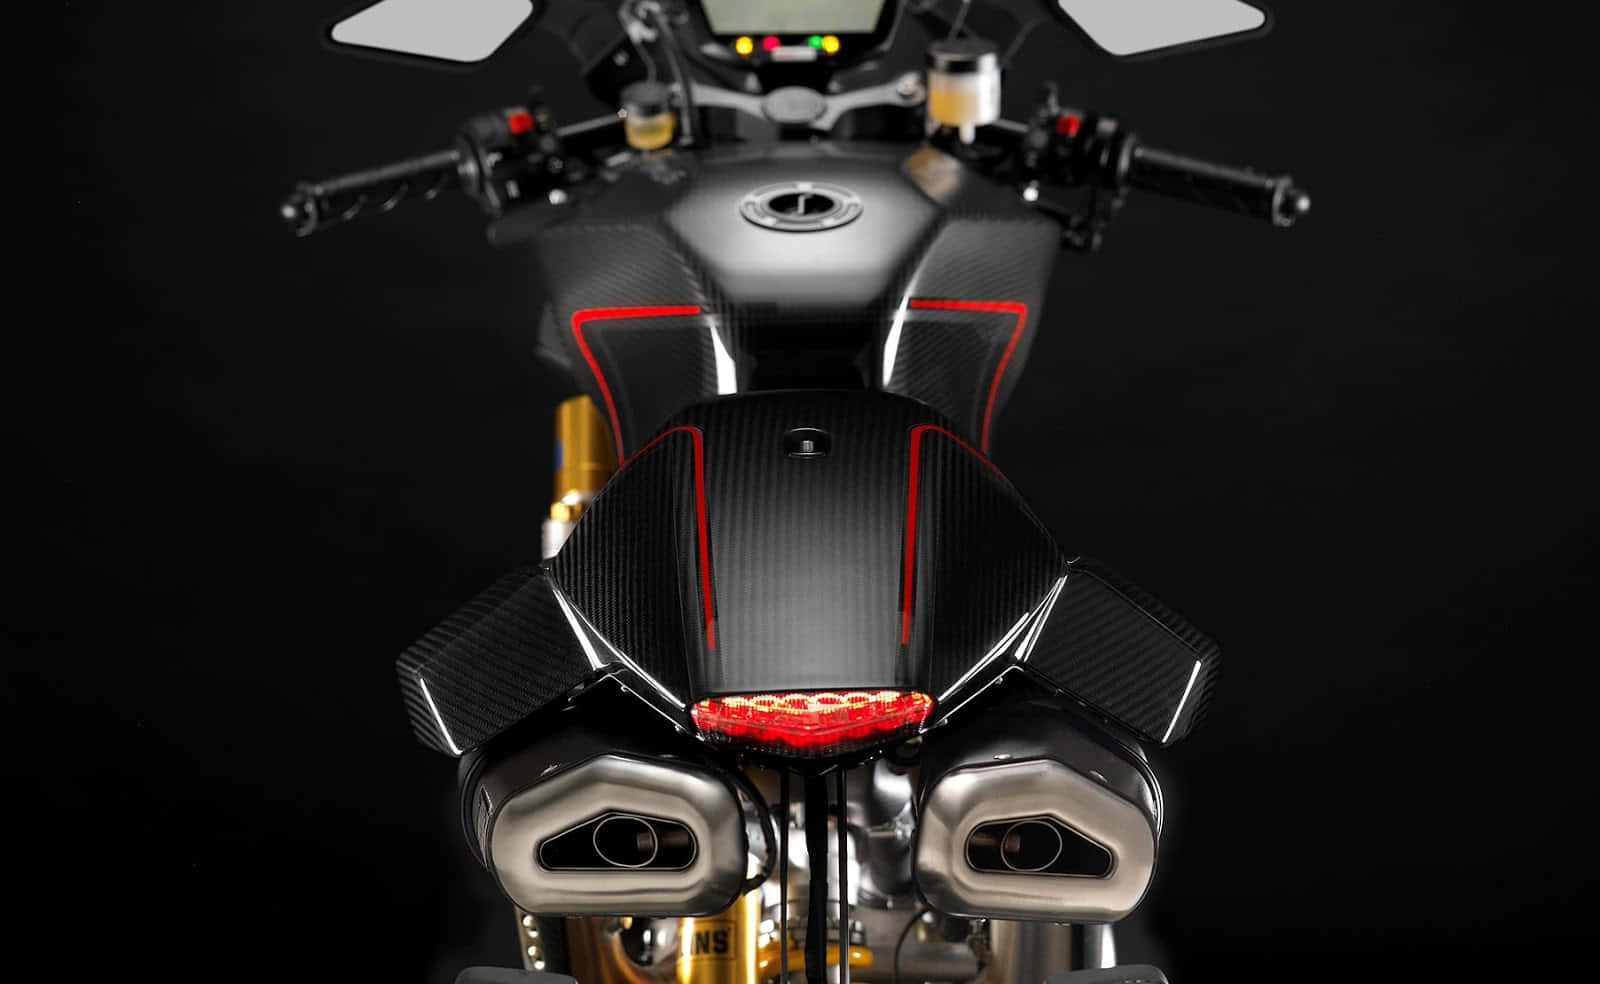 Immaculate Design Meets Performance - Vyrus Motorcycle Wallpaper